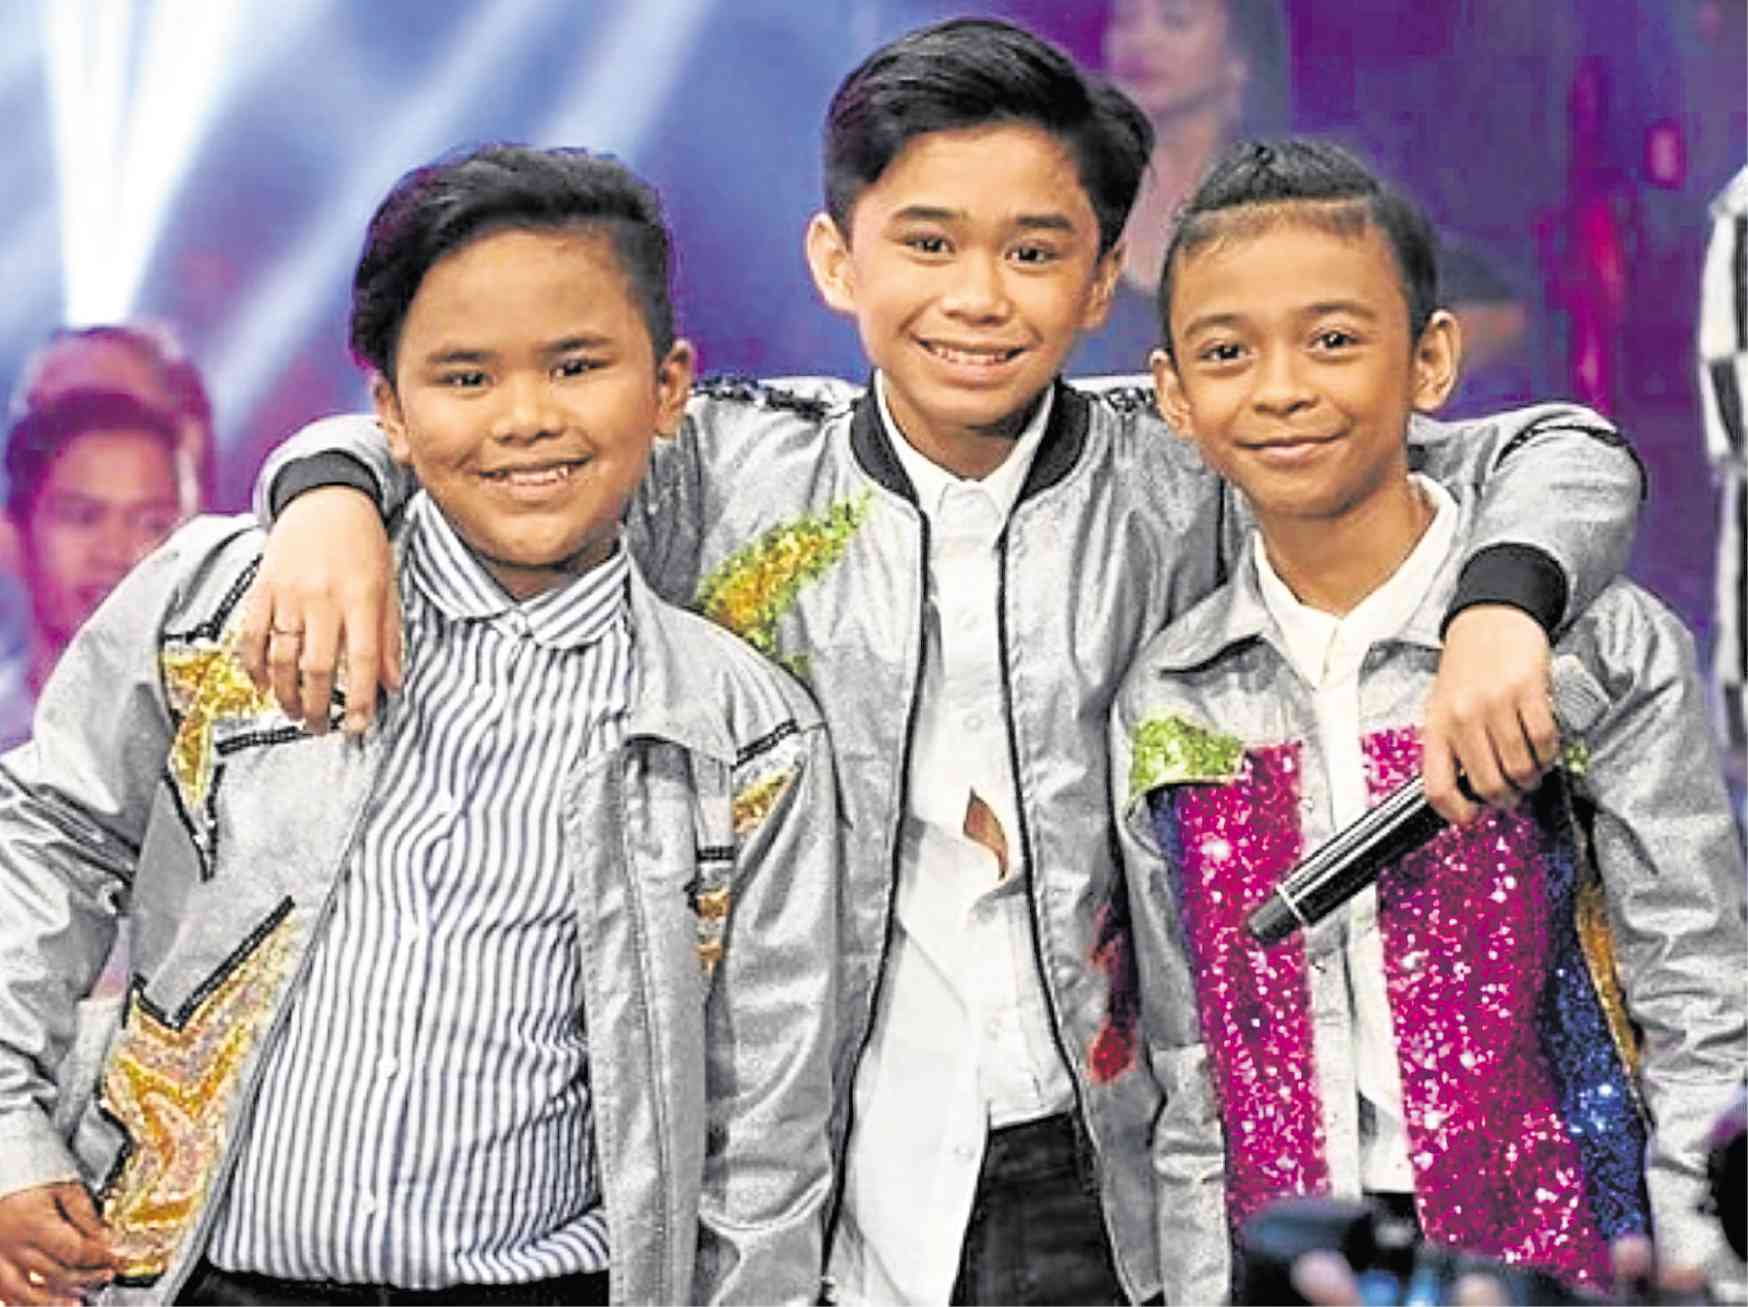 TNT Boys convince Mario Lopez to try balut